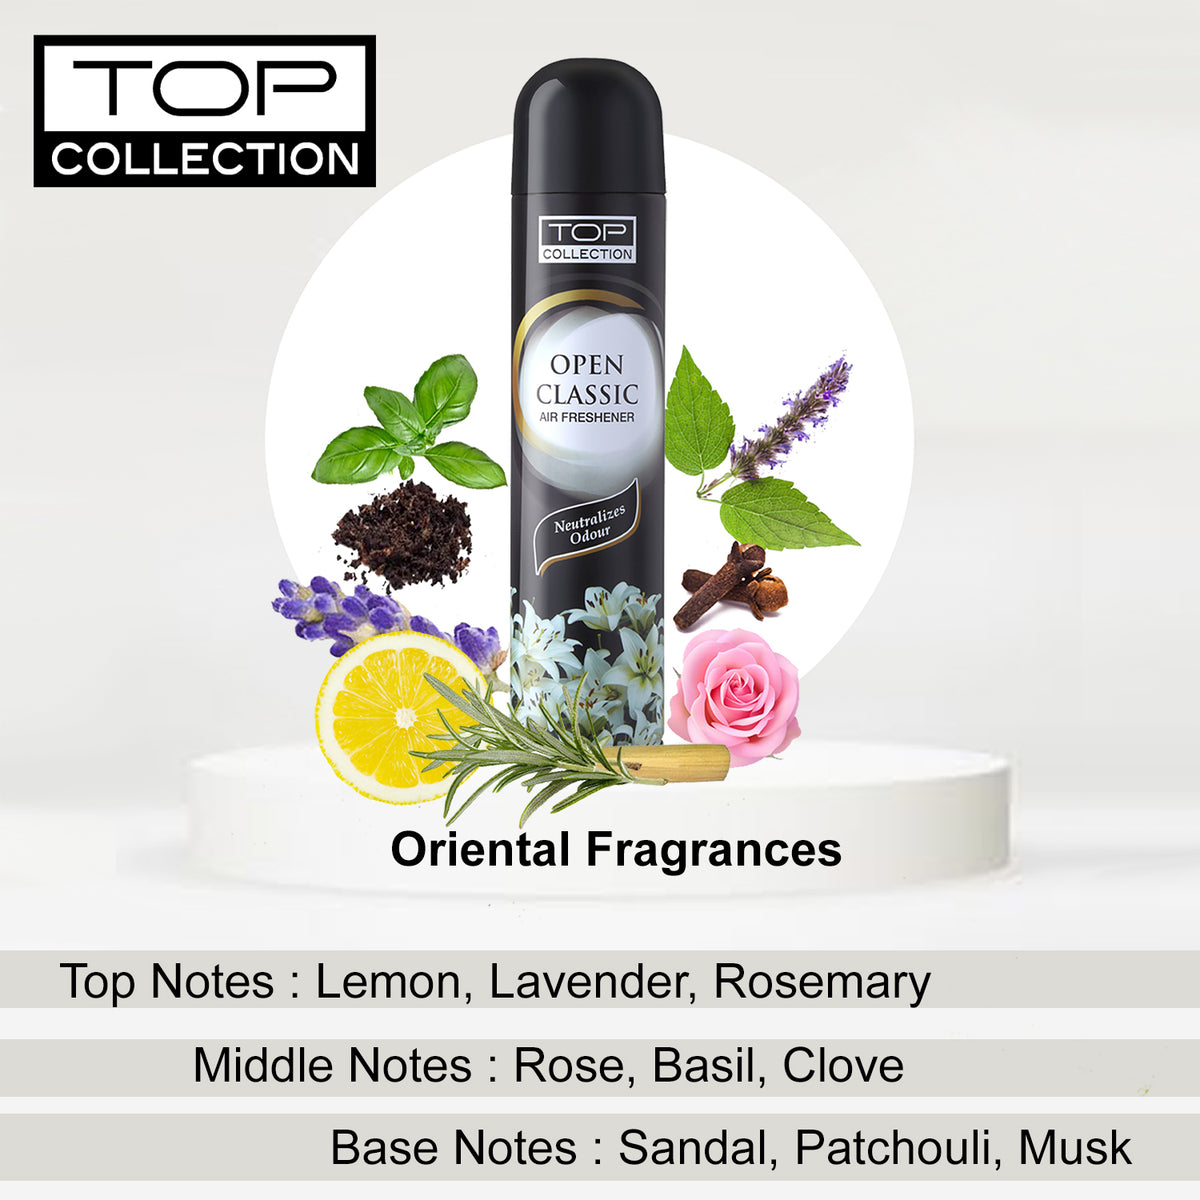 Top Collection Air Freshener - Open Classic, 300ml